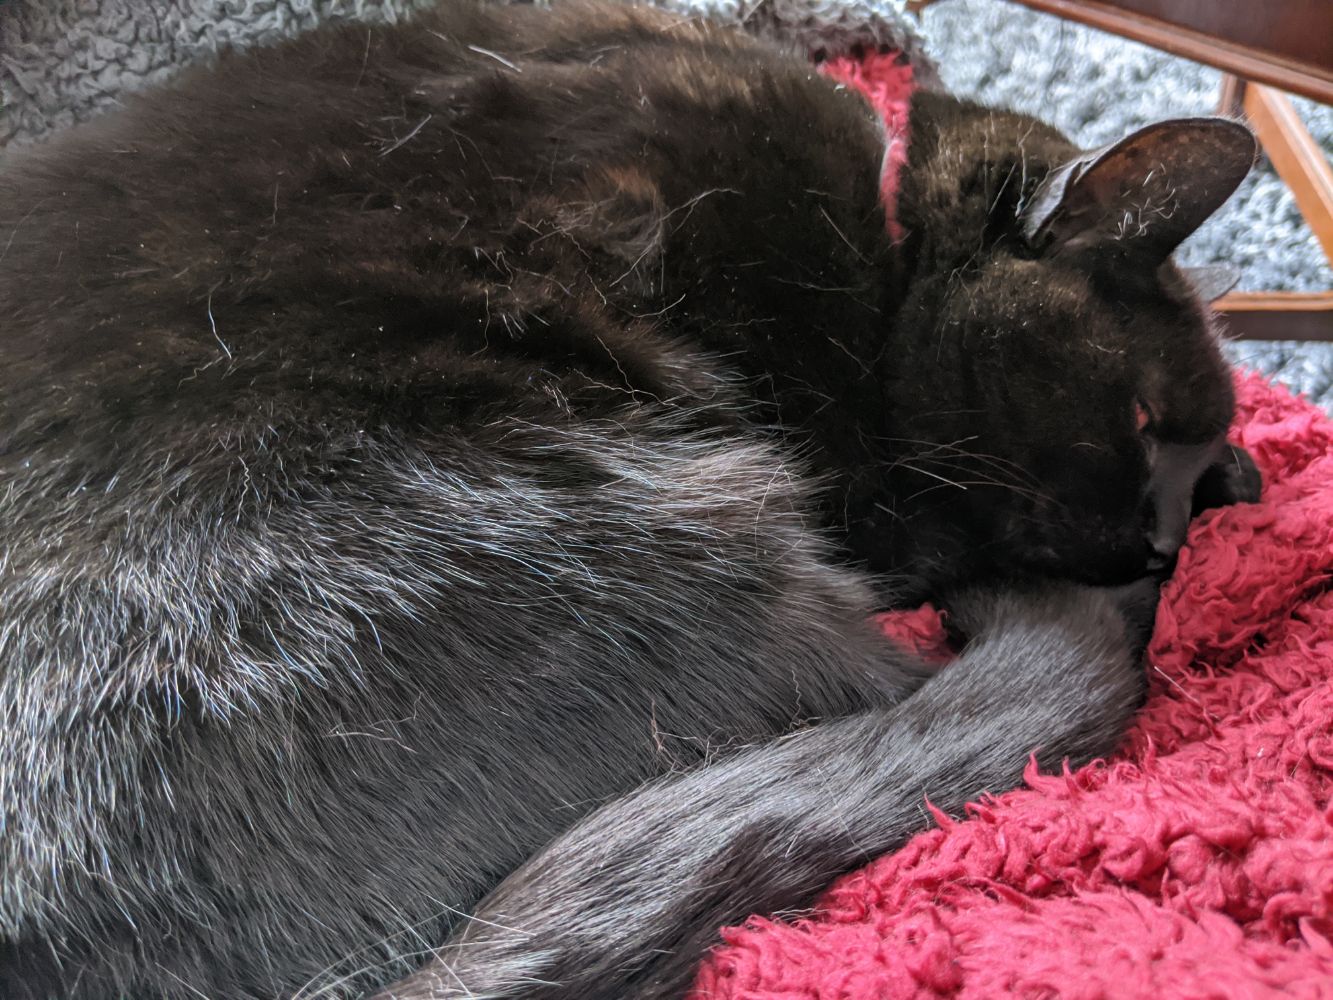 Black cat sleeping, one eye slightly open, with his tail curled up to his chin